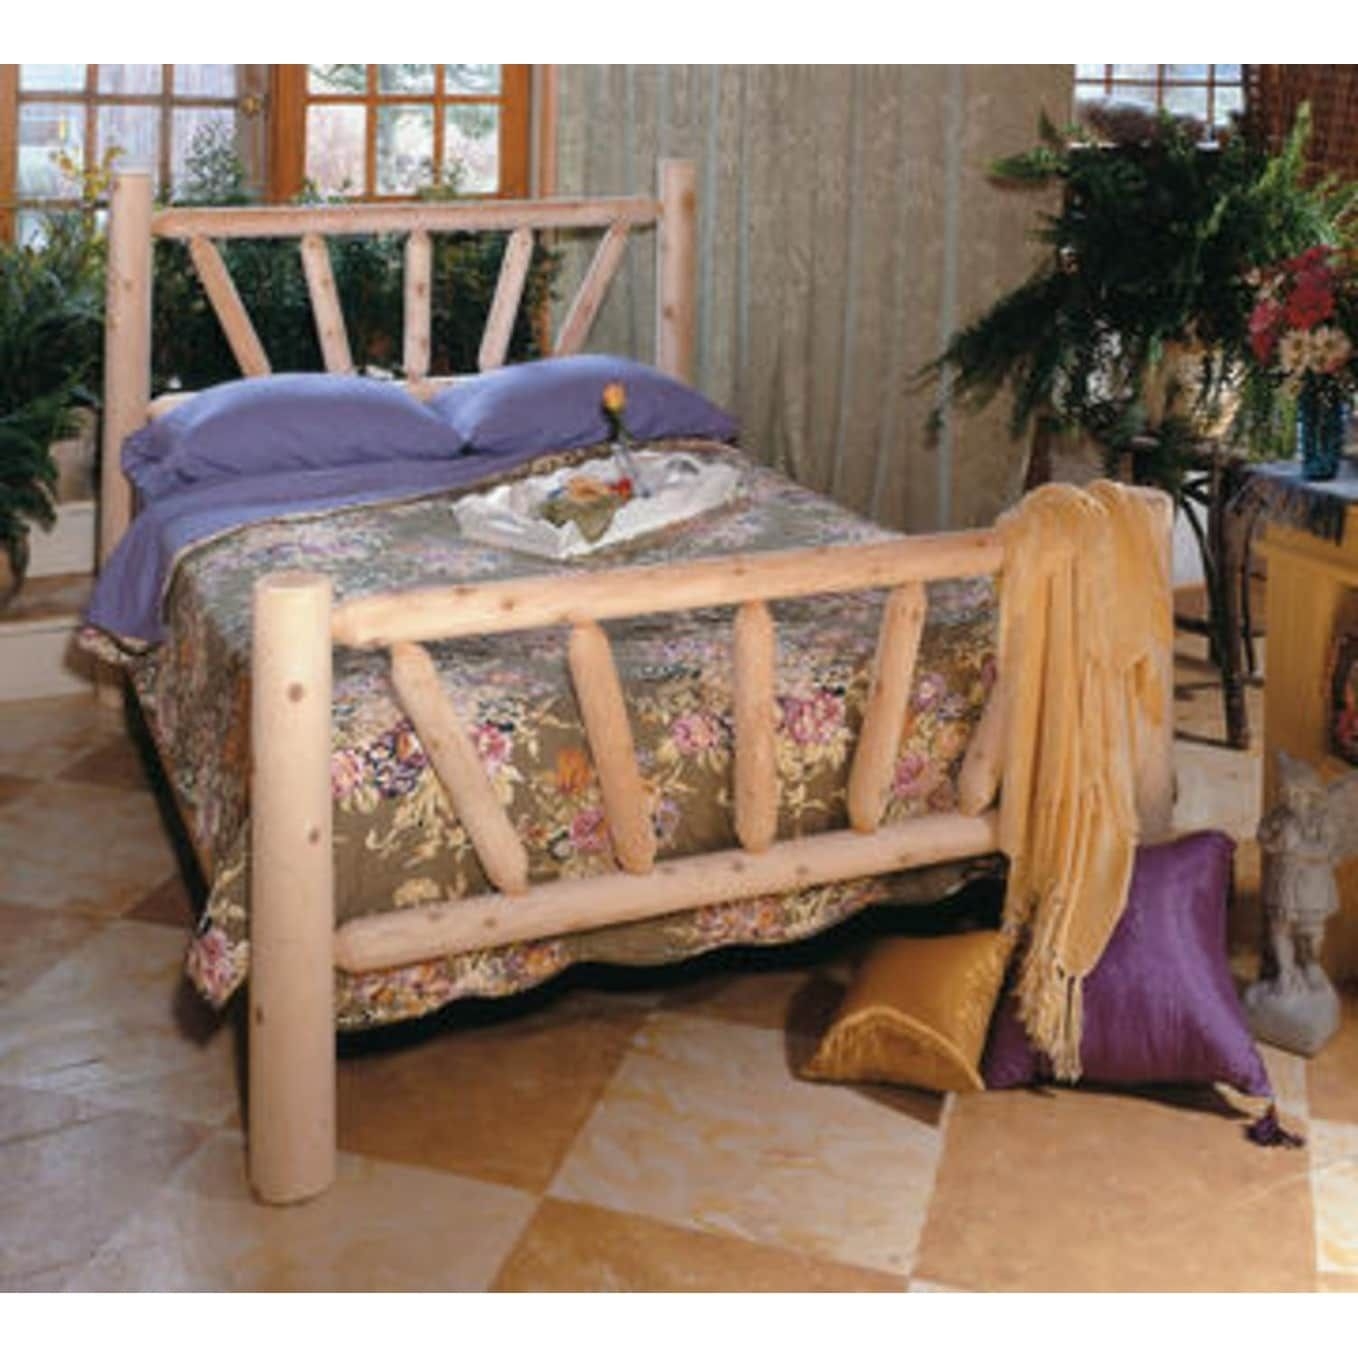 82" Handcrafted Cedar Log Style Wooden Sunrise Queen Bed Frame